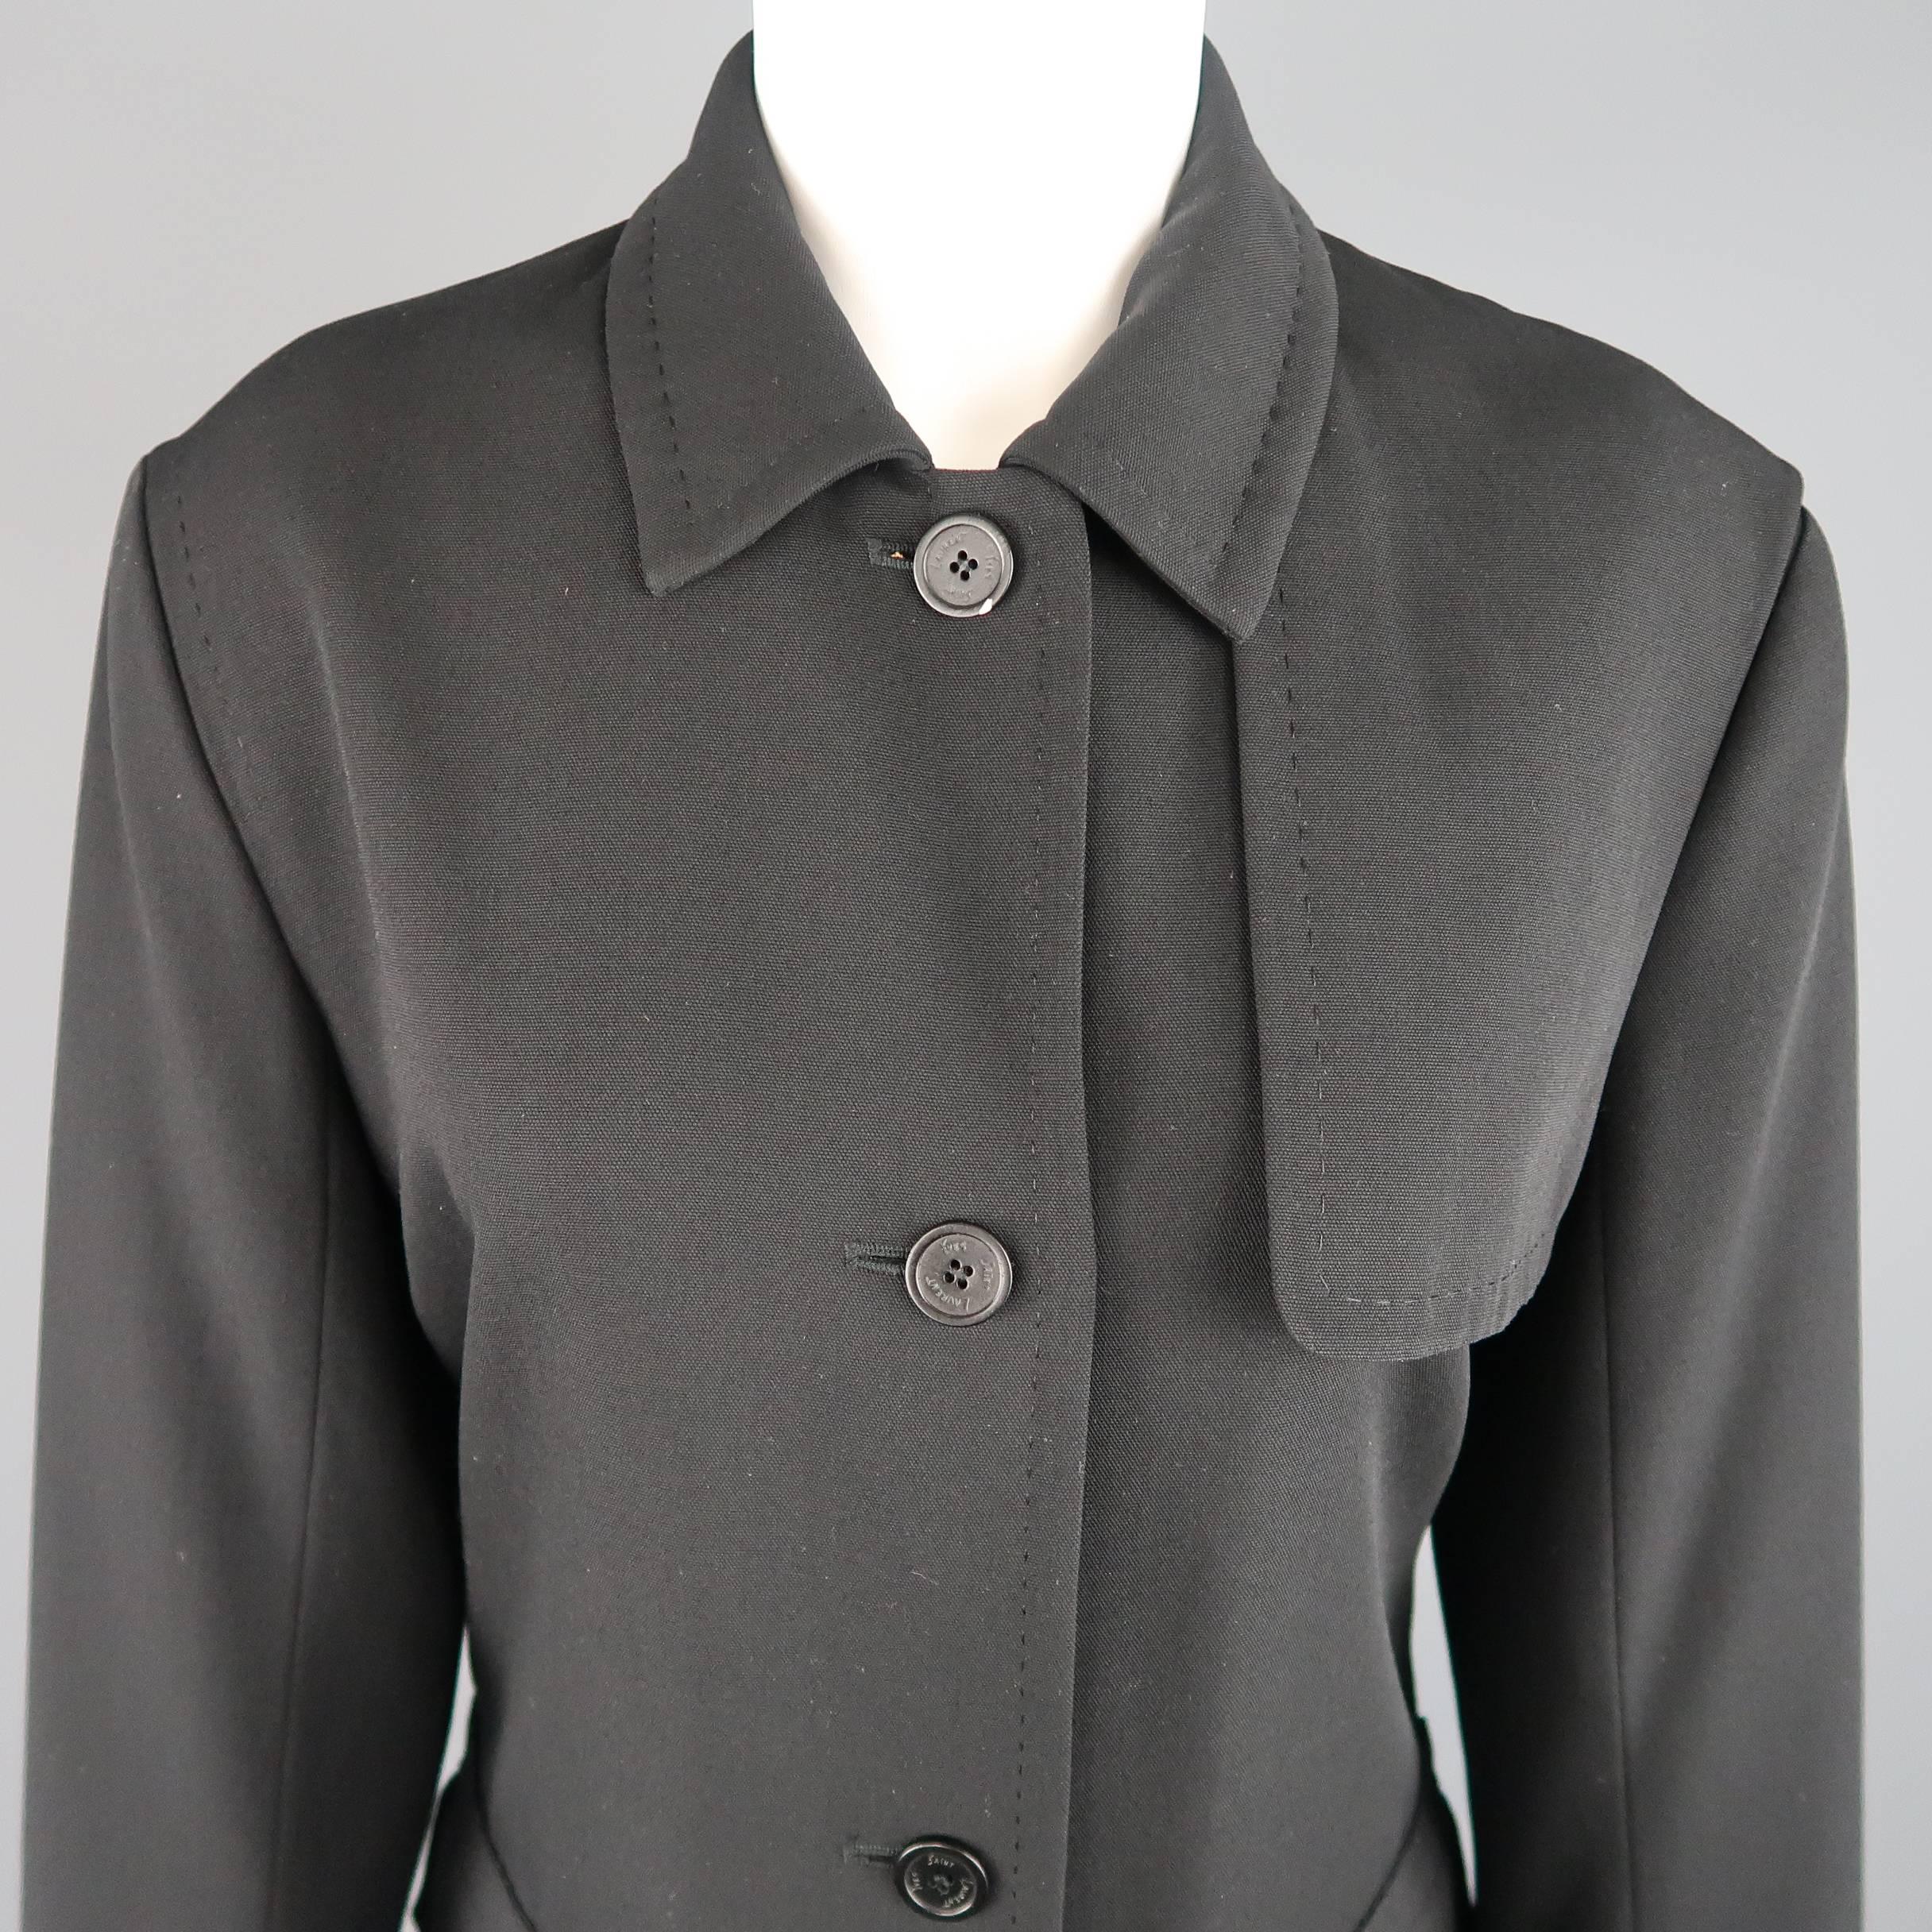 Vintage YVES SAINT LAURENT RIVE GAUCHE jacket comes in a black wool blend canvas with top stitching throughout and features a classic pointed collar, four button closure, patch flap pockets, asymmetrical storm flap, and belted cuffs. Made in